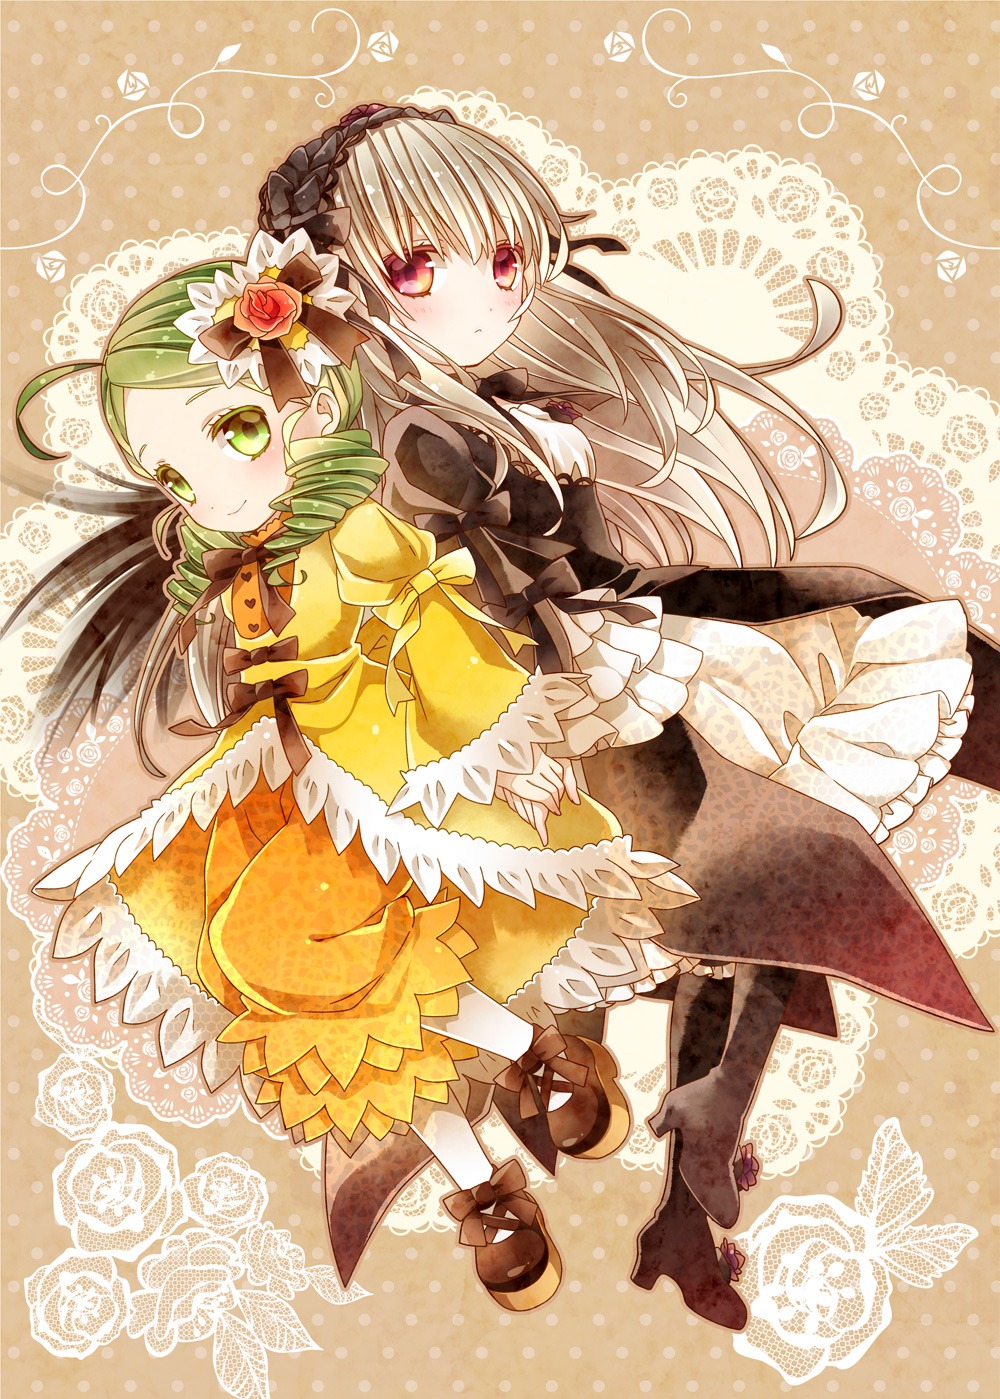 2girls ahoge back-to-back bloomers boots bow commentary_request dress drill_hair flower frills gothic_lolita green_eyes green_hair hair_ornament hairband heart high_heels highres holding_hands image kanaria lolita_fashion long_hair long_sleeves mary_janes moru multiple_girls pair pantyhose puffy_sleeves red_eyes rose rozen_maiden shoes silver_hair smile suigintou white_legwear wide_sleeves wings